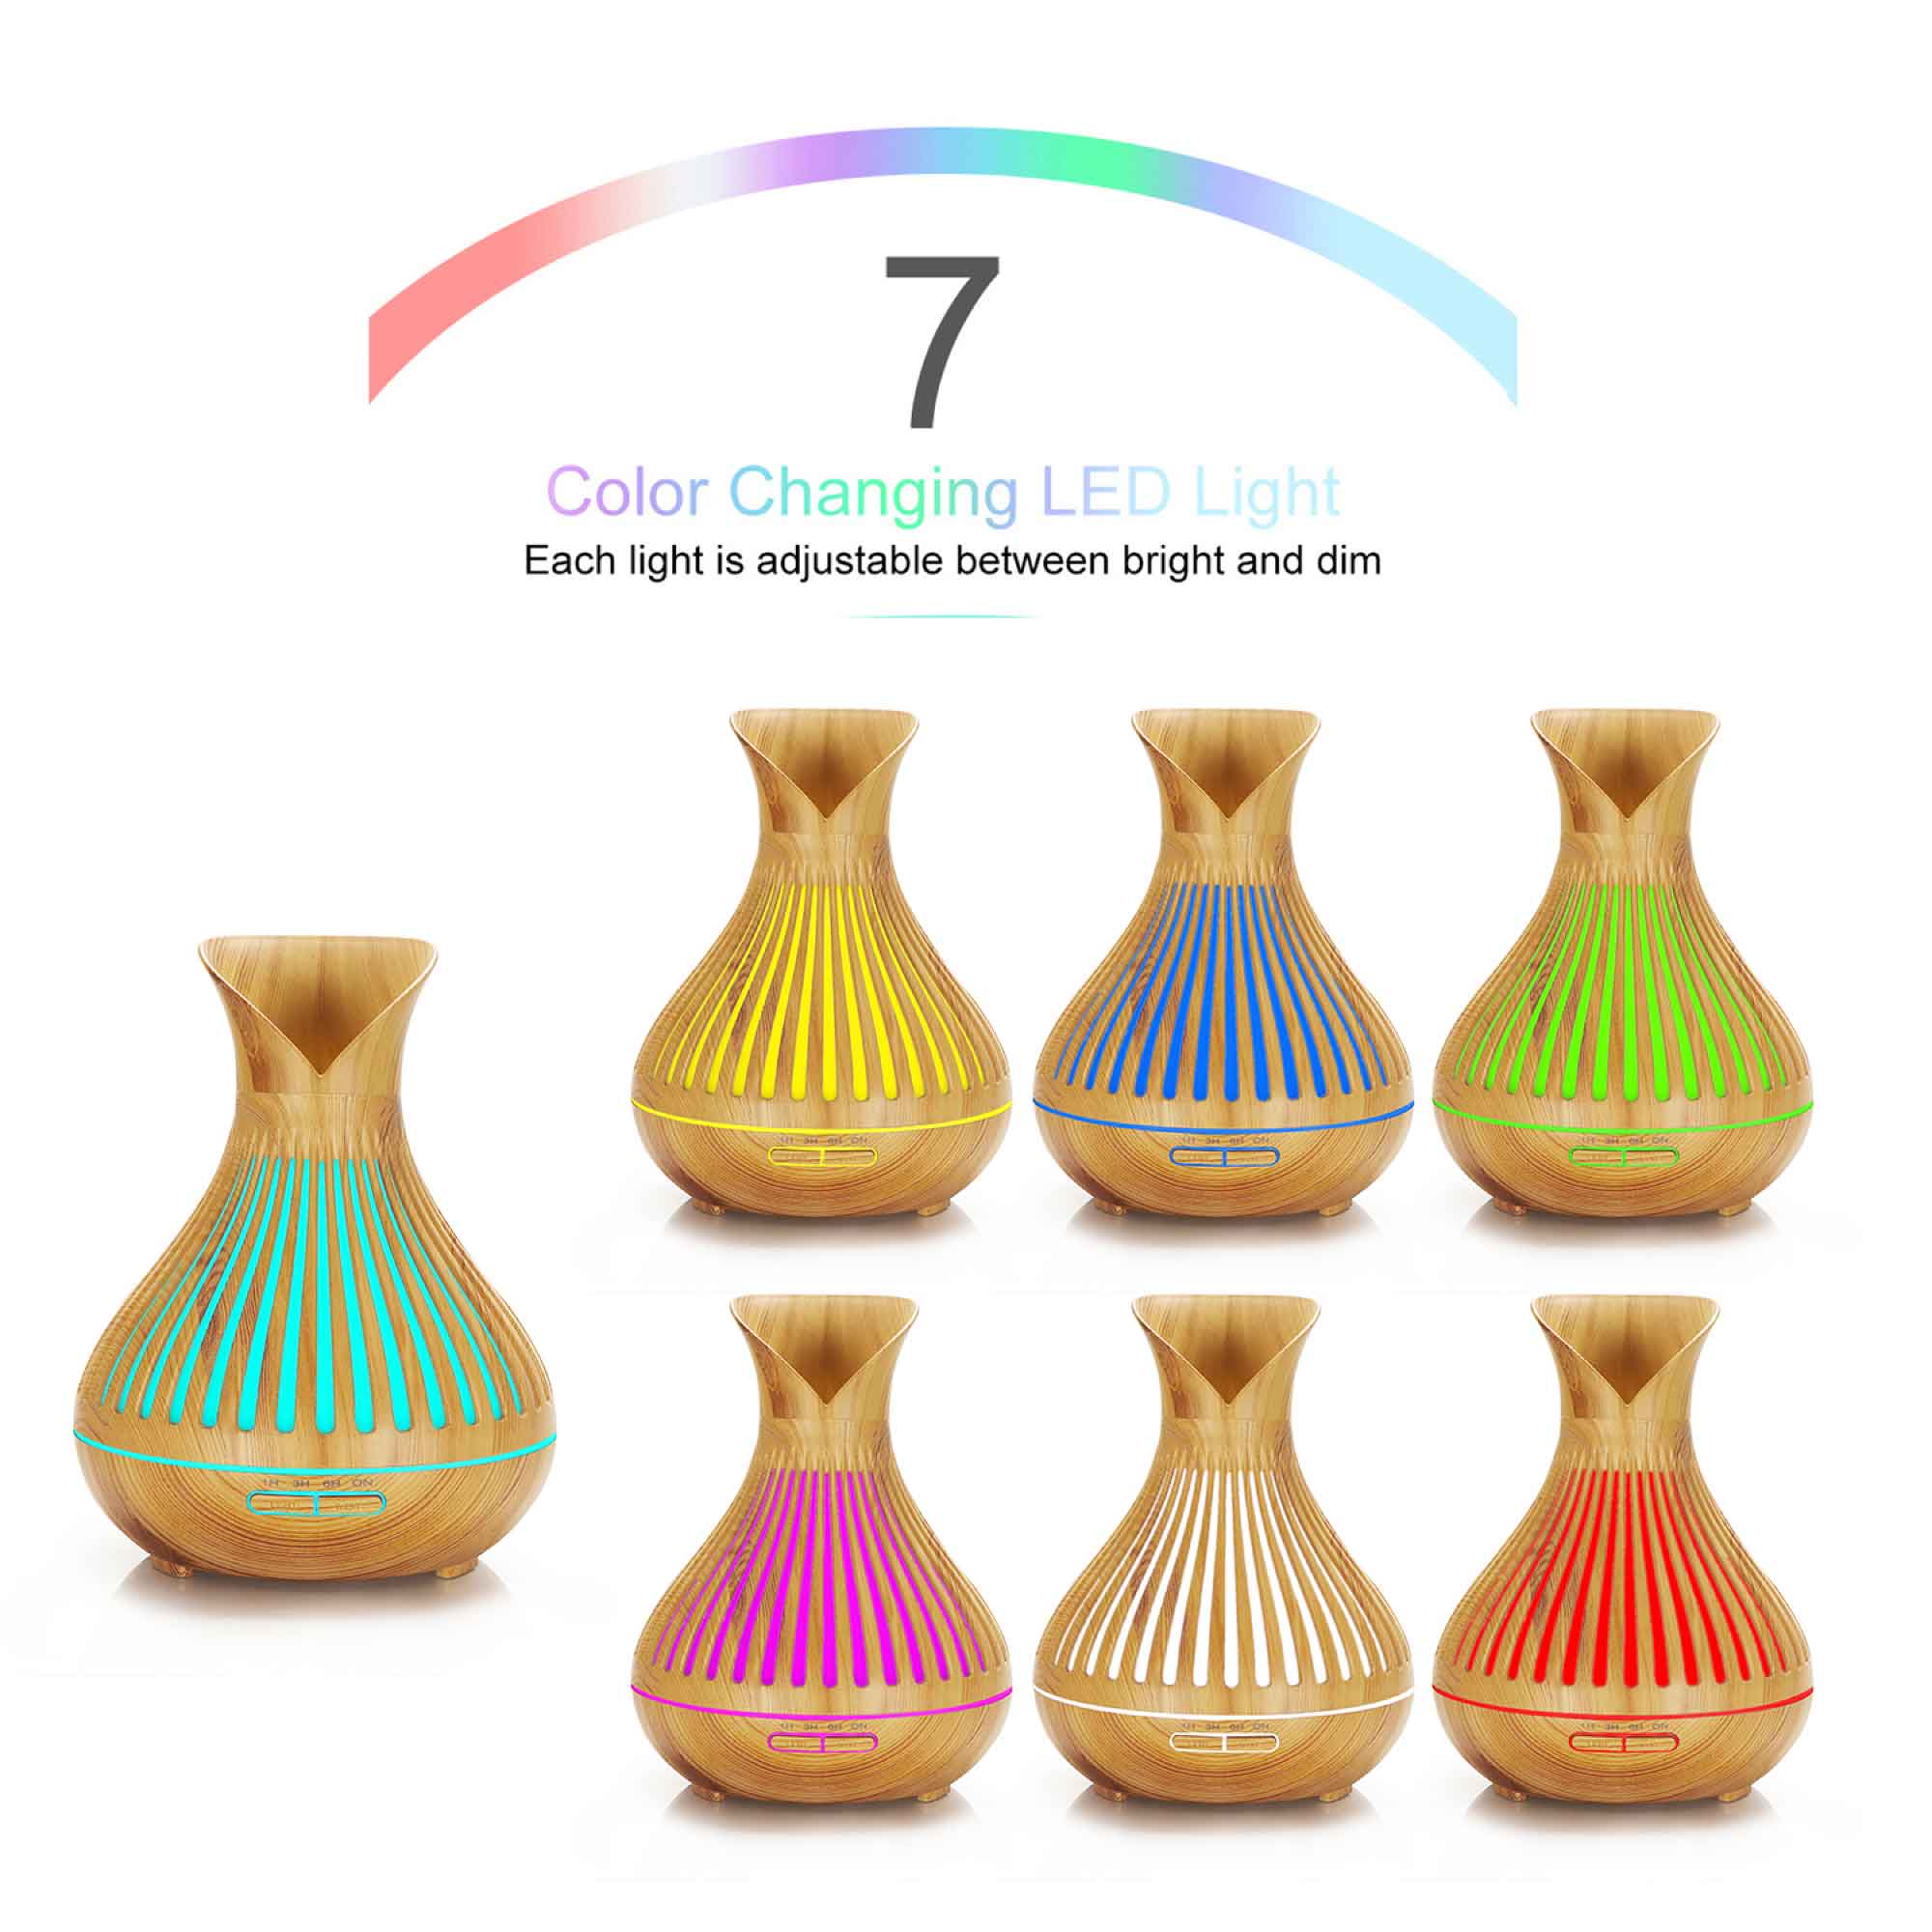 Essential Oil Aroma Diffuser and Remote - 500ml Tulip Top Wood Mist Humidifier